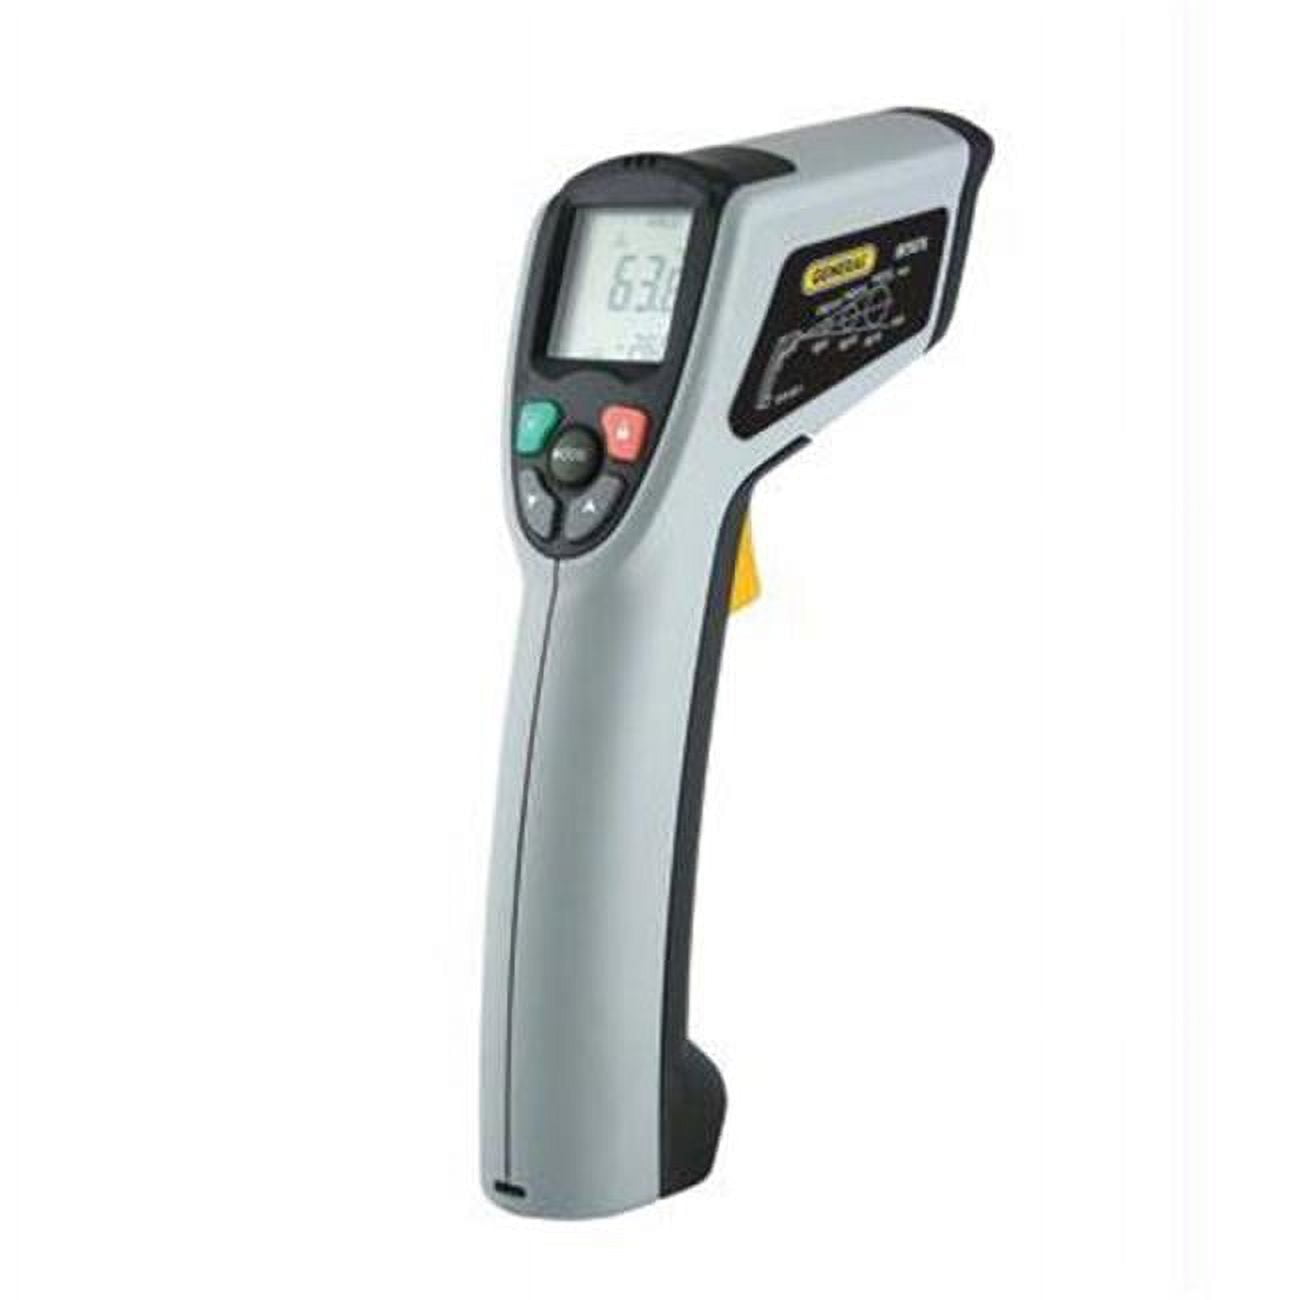 BENETECH GM320 Non-Contact Digital Laser Grip Infrared Thermometer  Temperature -58F-716F(-50C-380C), Digital Instant Read Meat Thermometer  Kitchen Coo